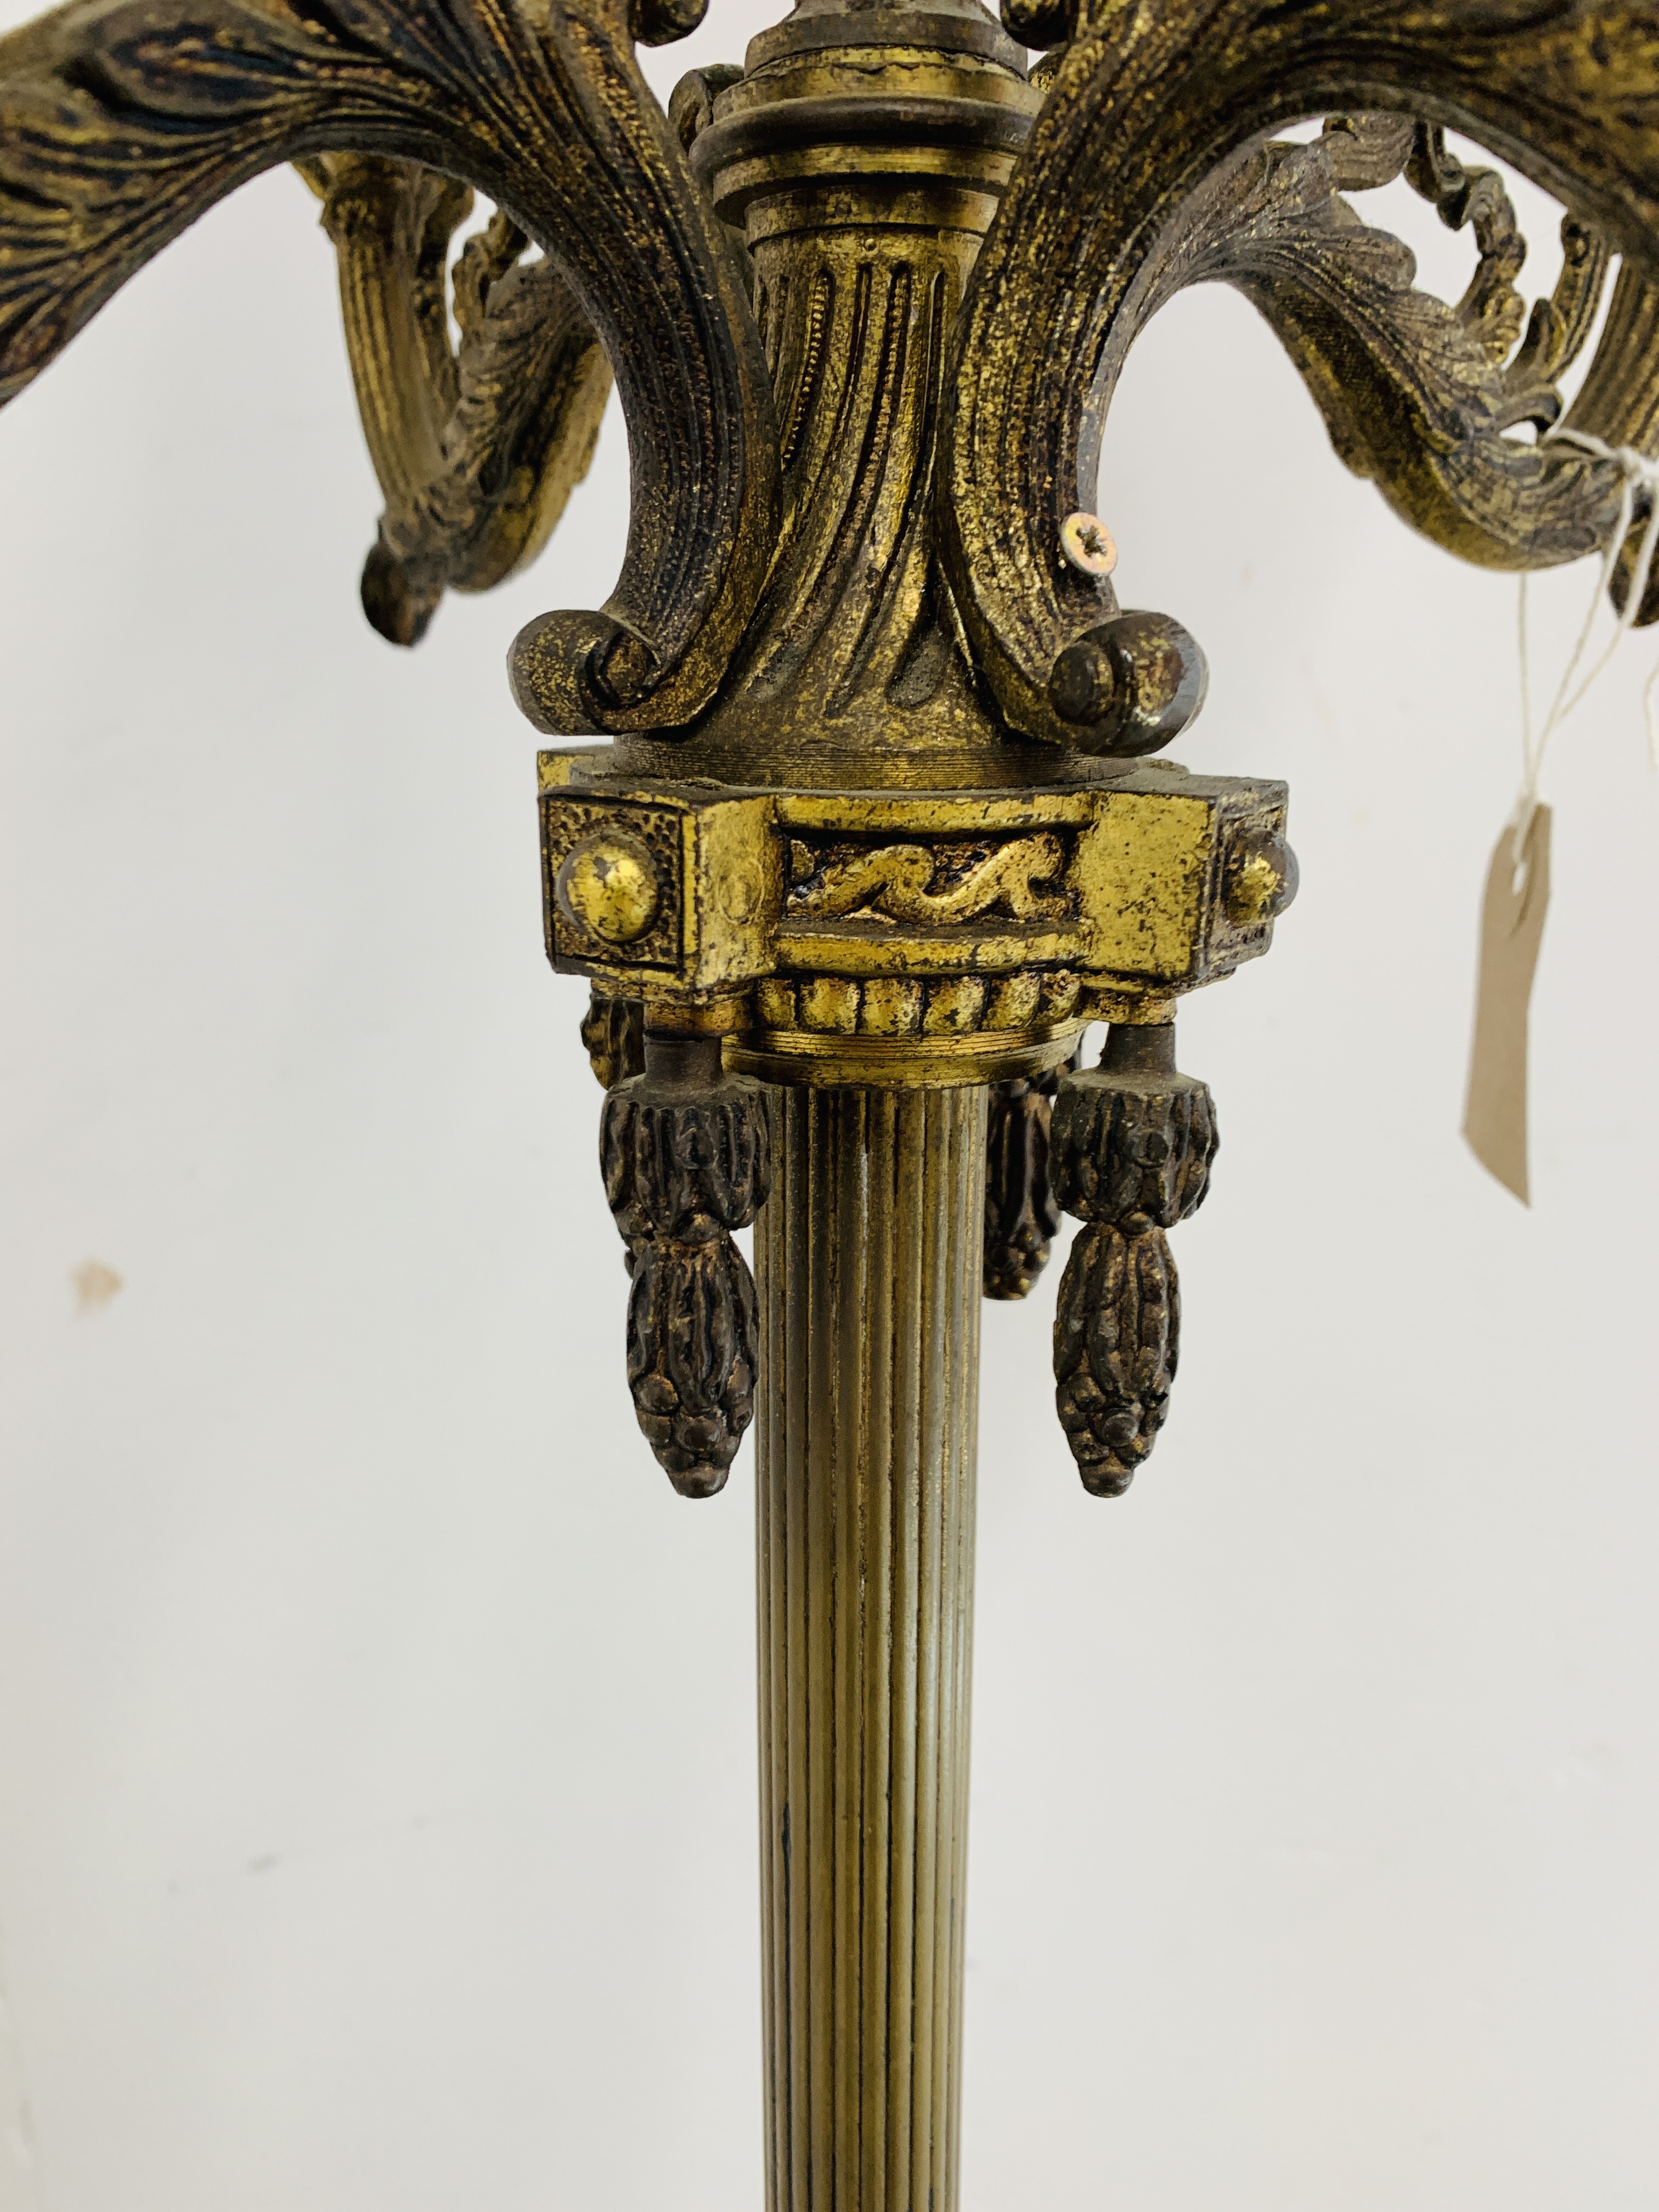 A CORINTHIAN COLUMN FLOOR STANDING FIVE BRANCH LAMP STANDARD THE BASE WITH MARBLE PLATFORM AND CLAW - Image 10 of 12